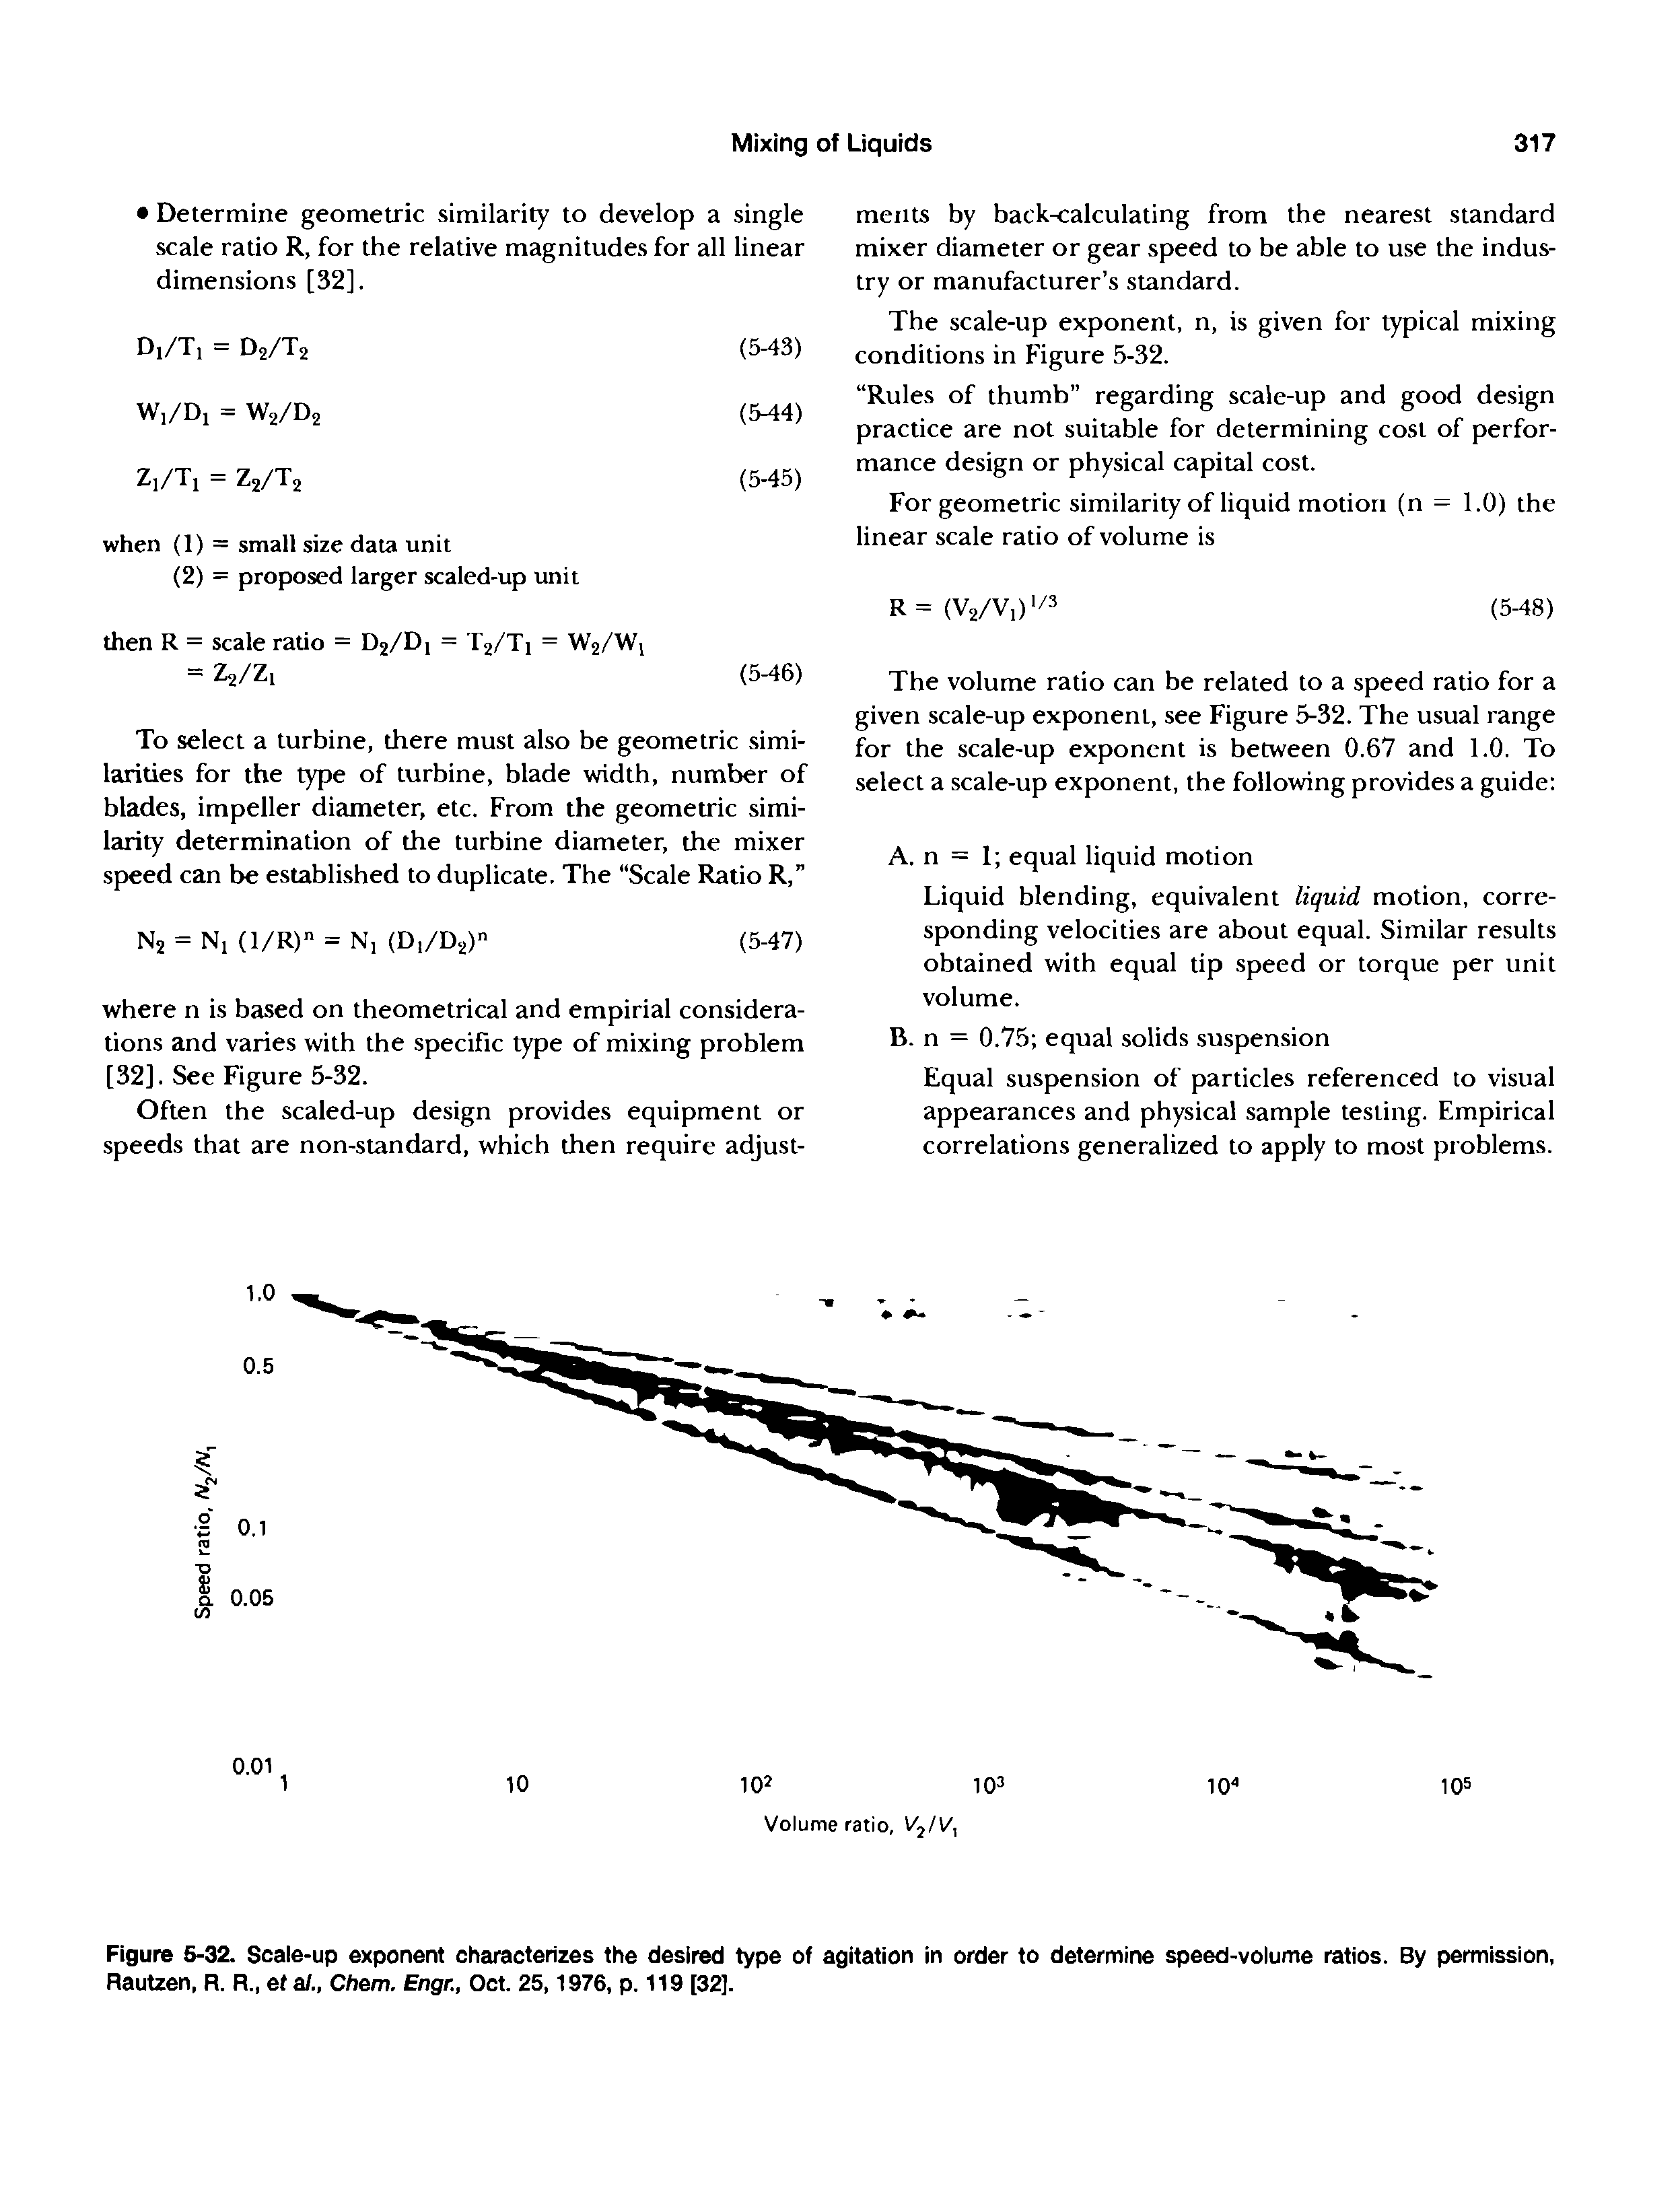 Figure 5-32. Scale-up exponent characterizes the desired type of agitation in order to determine speed-volume ratios. By permission, Rautzen, R. R., et a/., Chem. Engr., Oct. 25,1976, p. 119 [32].